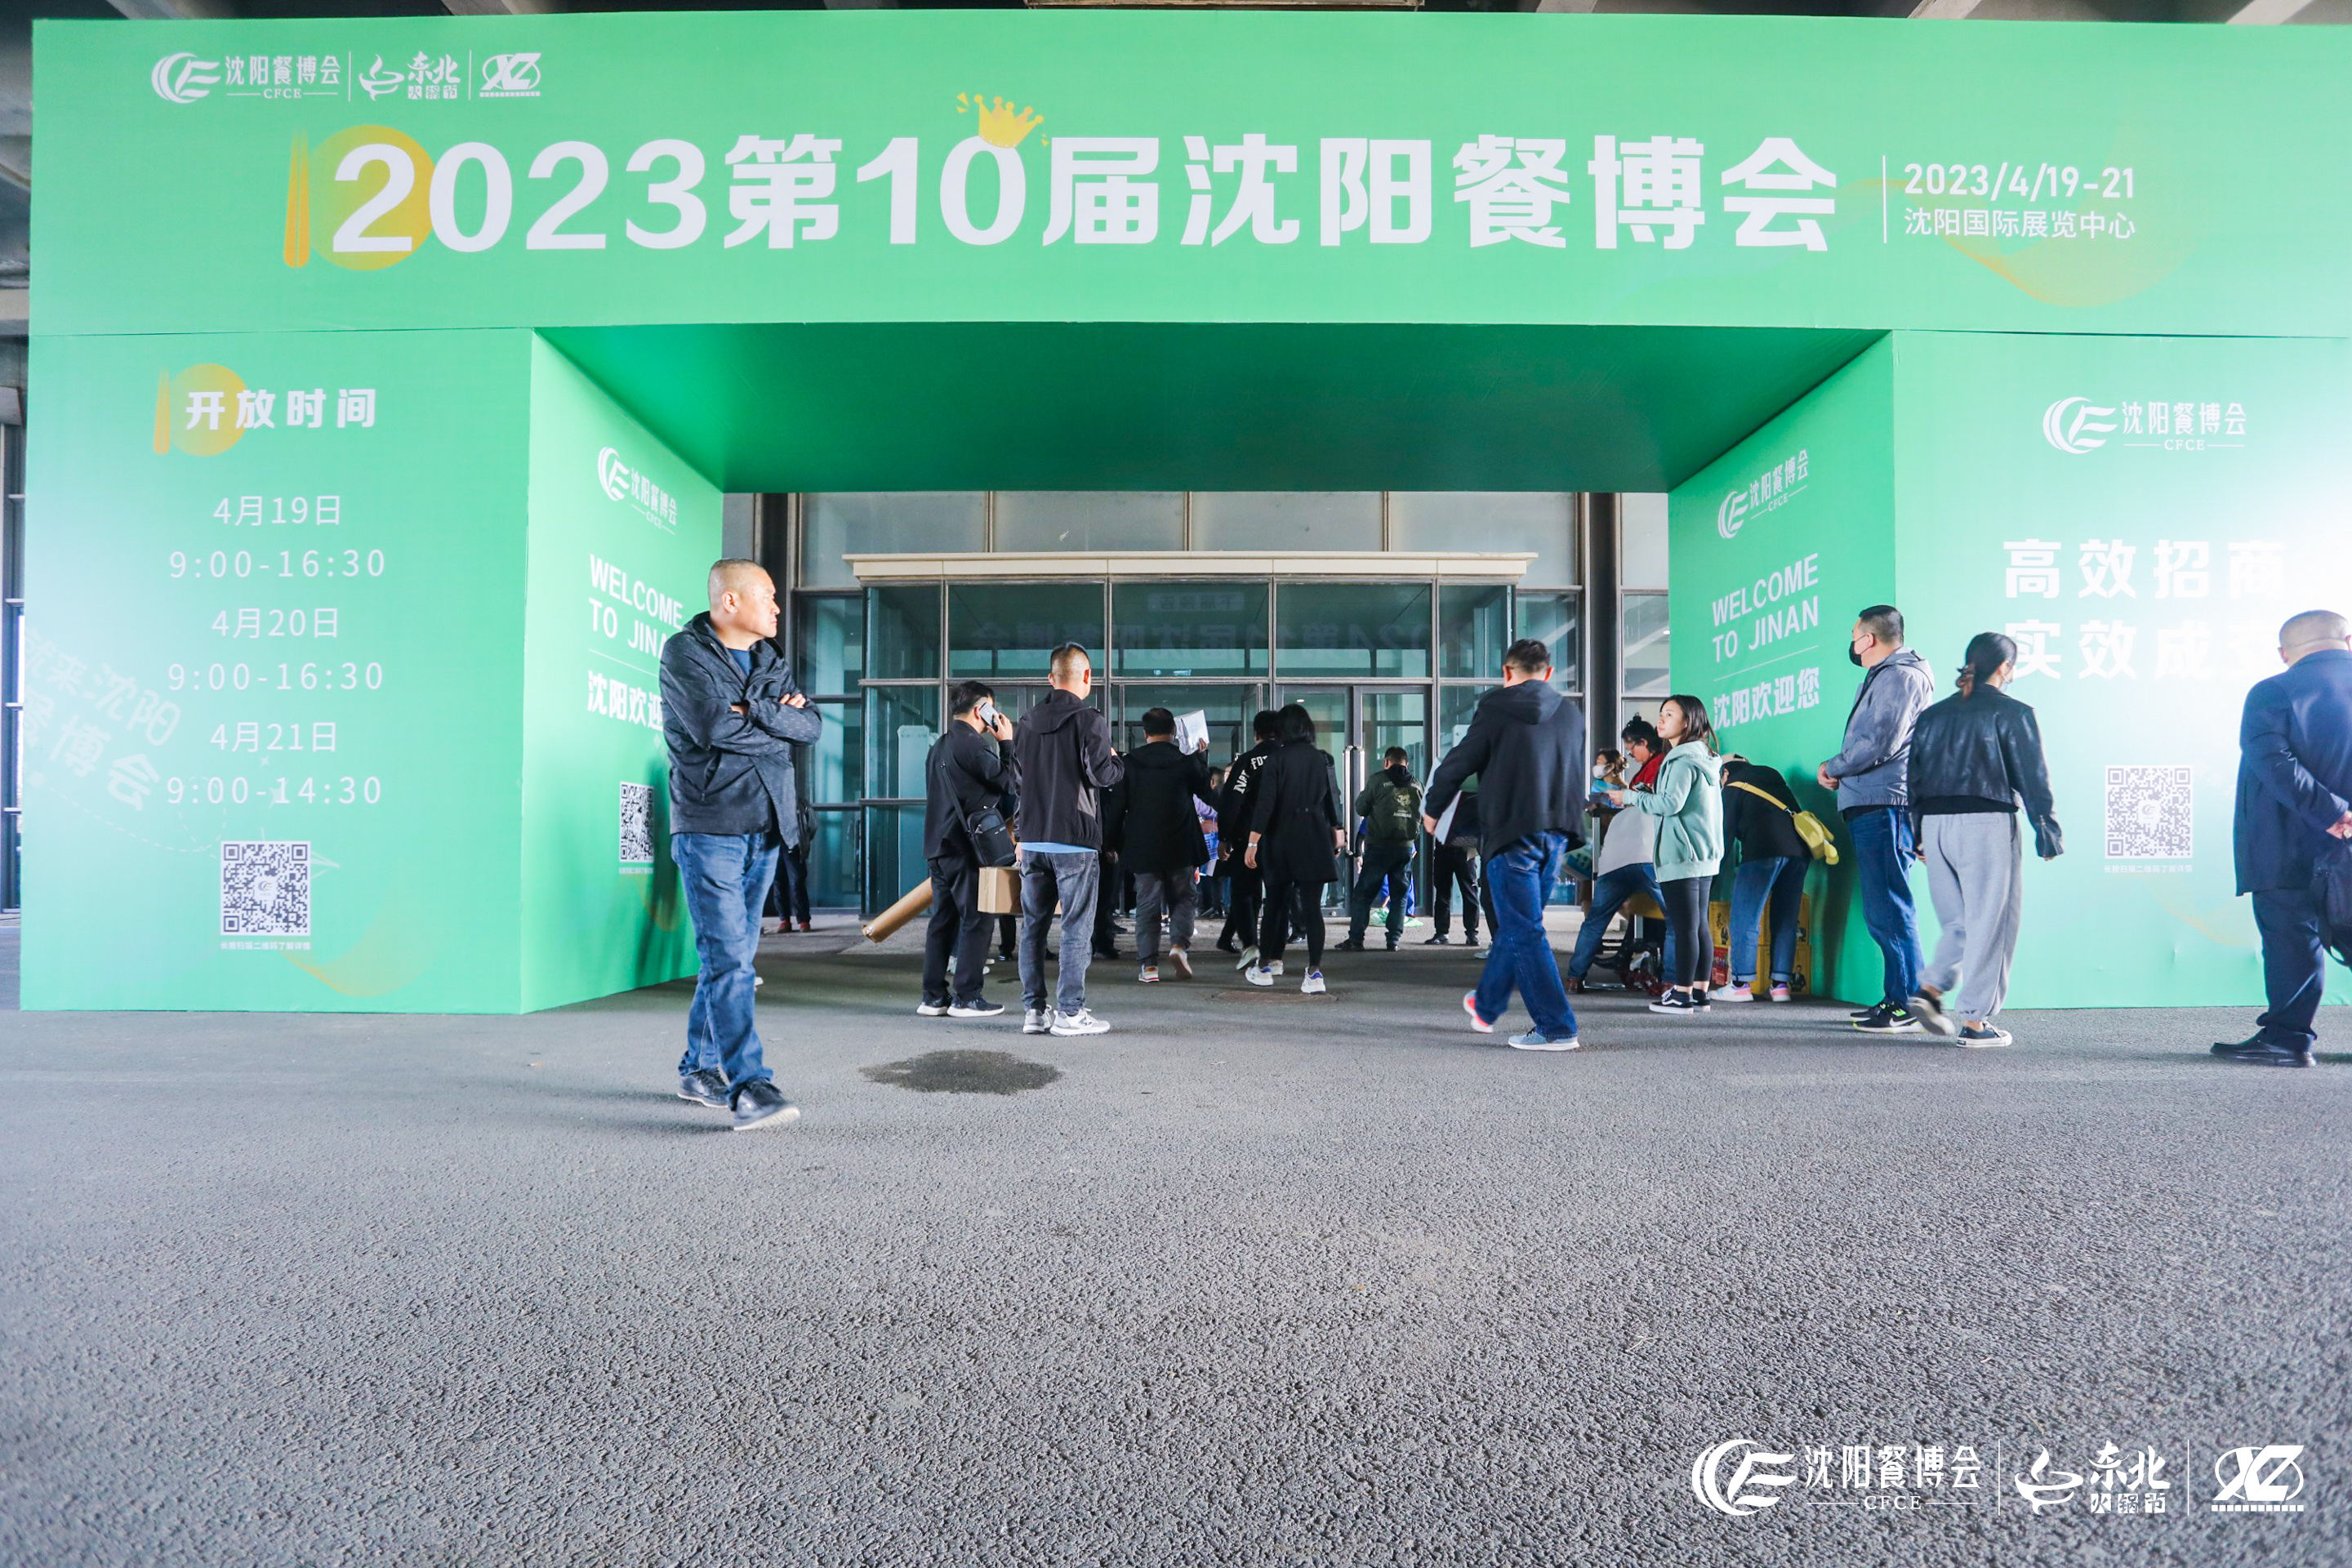 The 10th Shenyang Food Expo 2023 has successfully concluded! Full of praise, meet again next year!